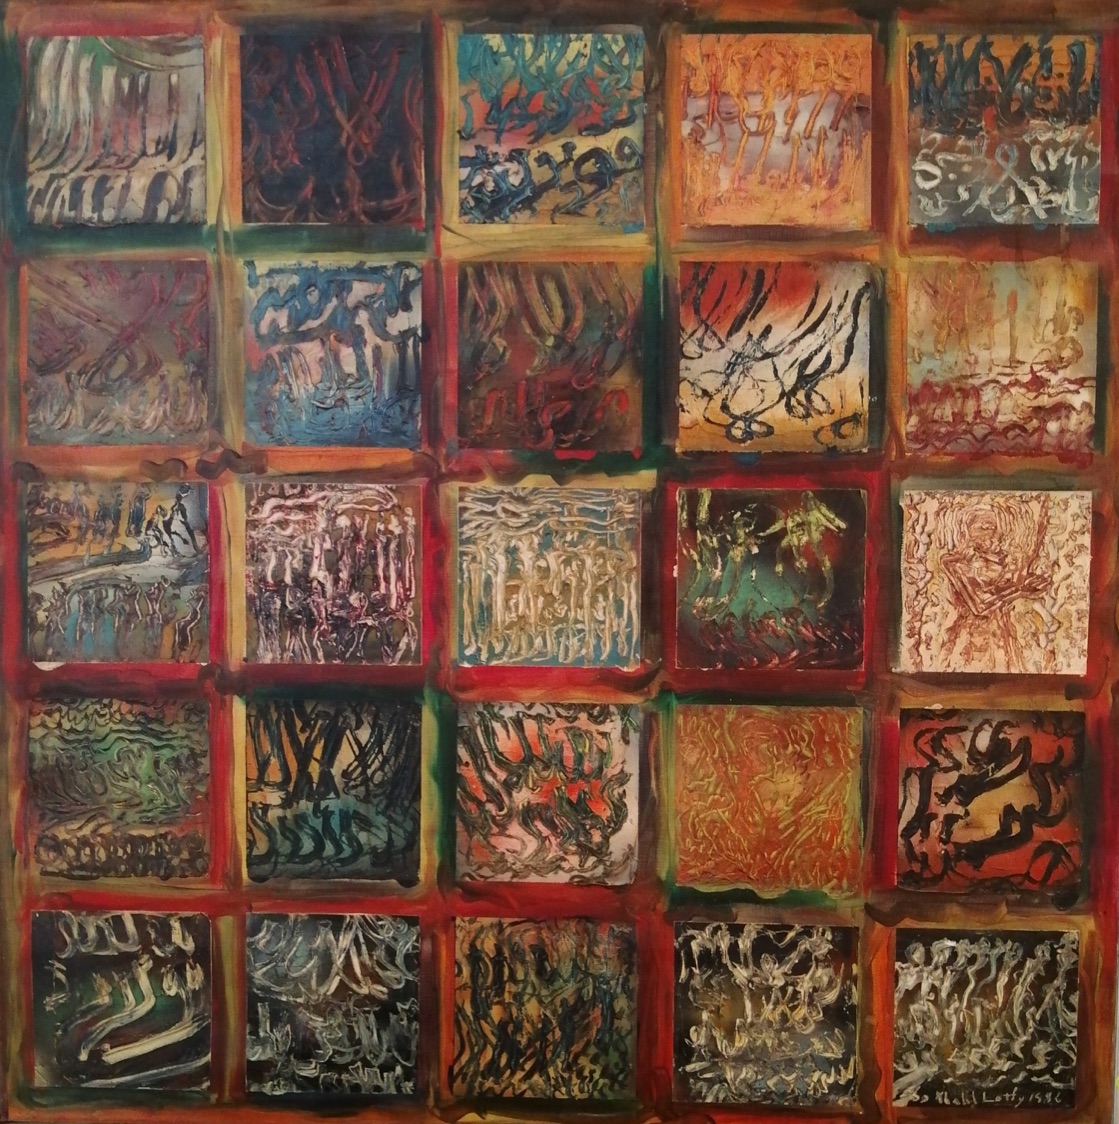 Abou Khalil Lotfy (1920-1993) Untitled, 1986  Oil on canvas  75 x 75 cm Signed and dated